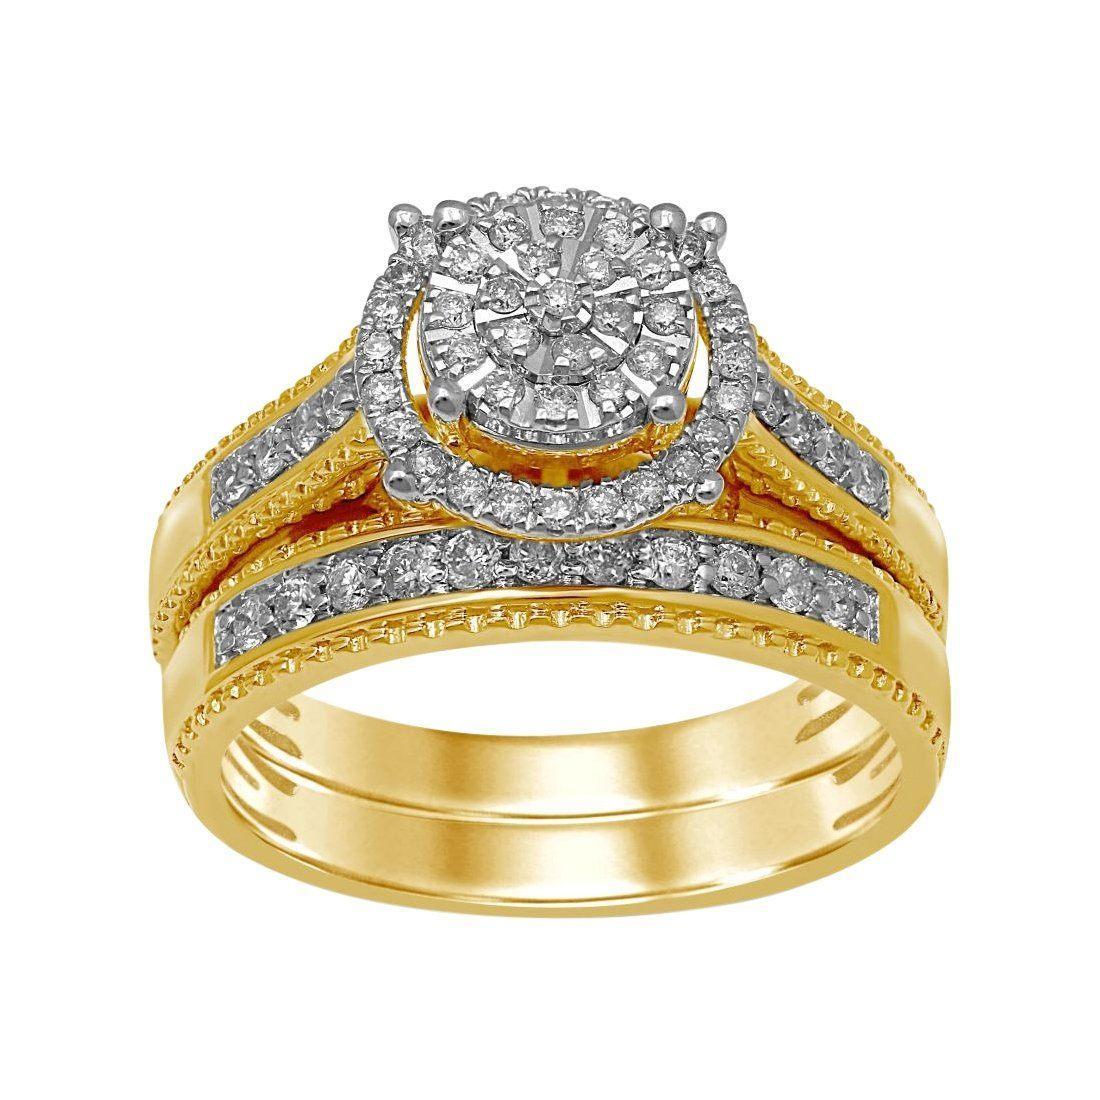 Bevilles Solitaire Look Halo Ring with 1/2ct of Diamonds in 9ct Yellow Gold